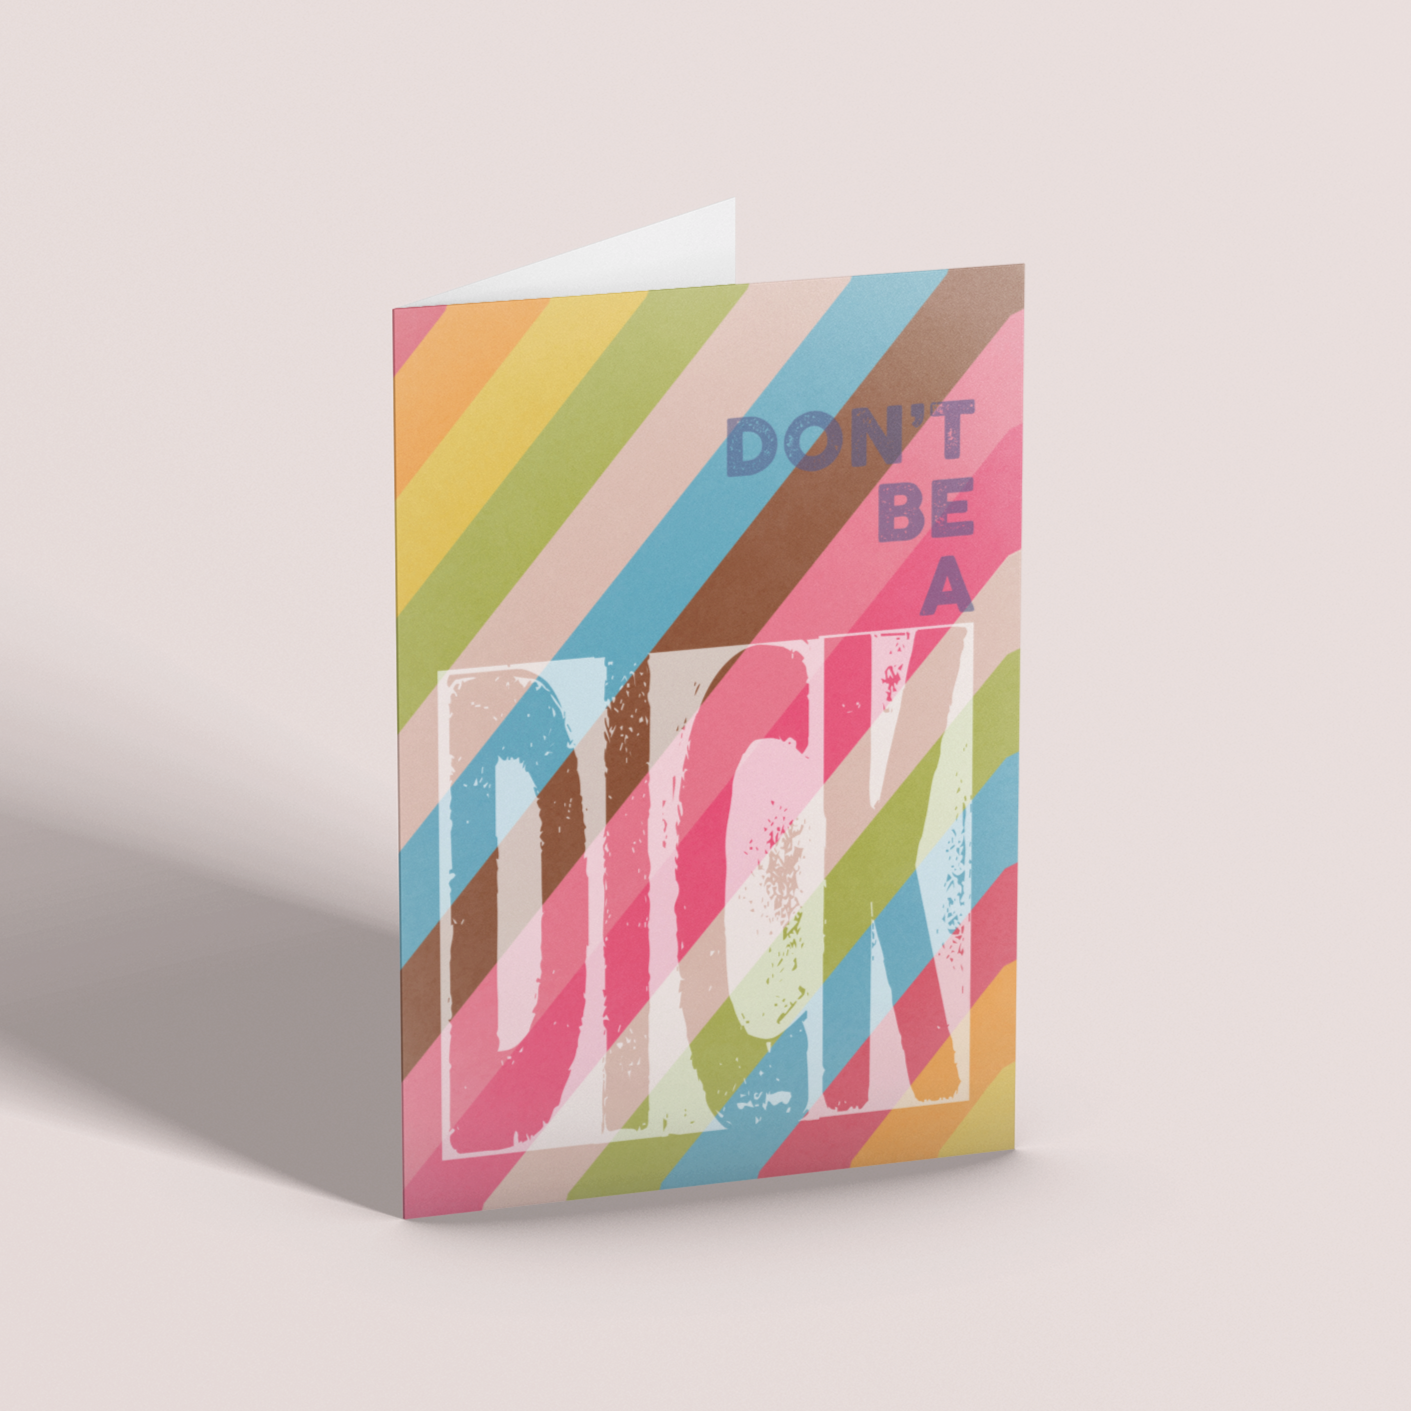 DON'T BE A DICK - Greetings Card